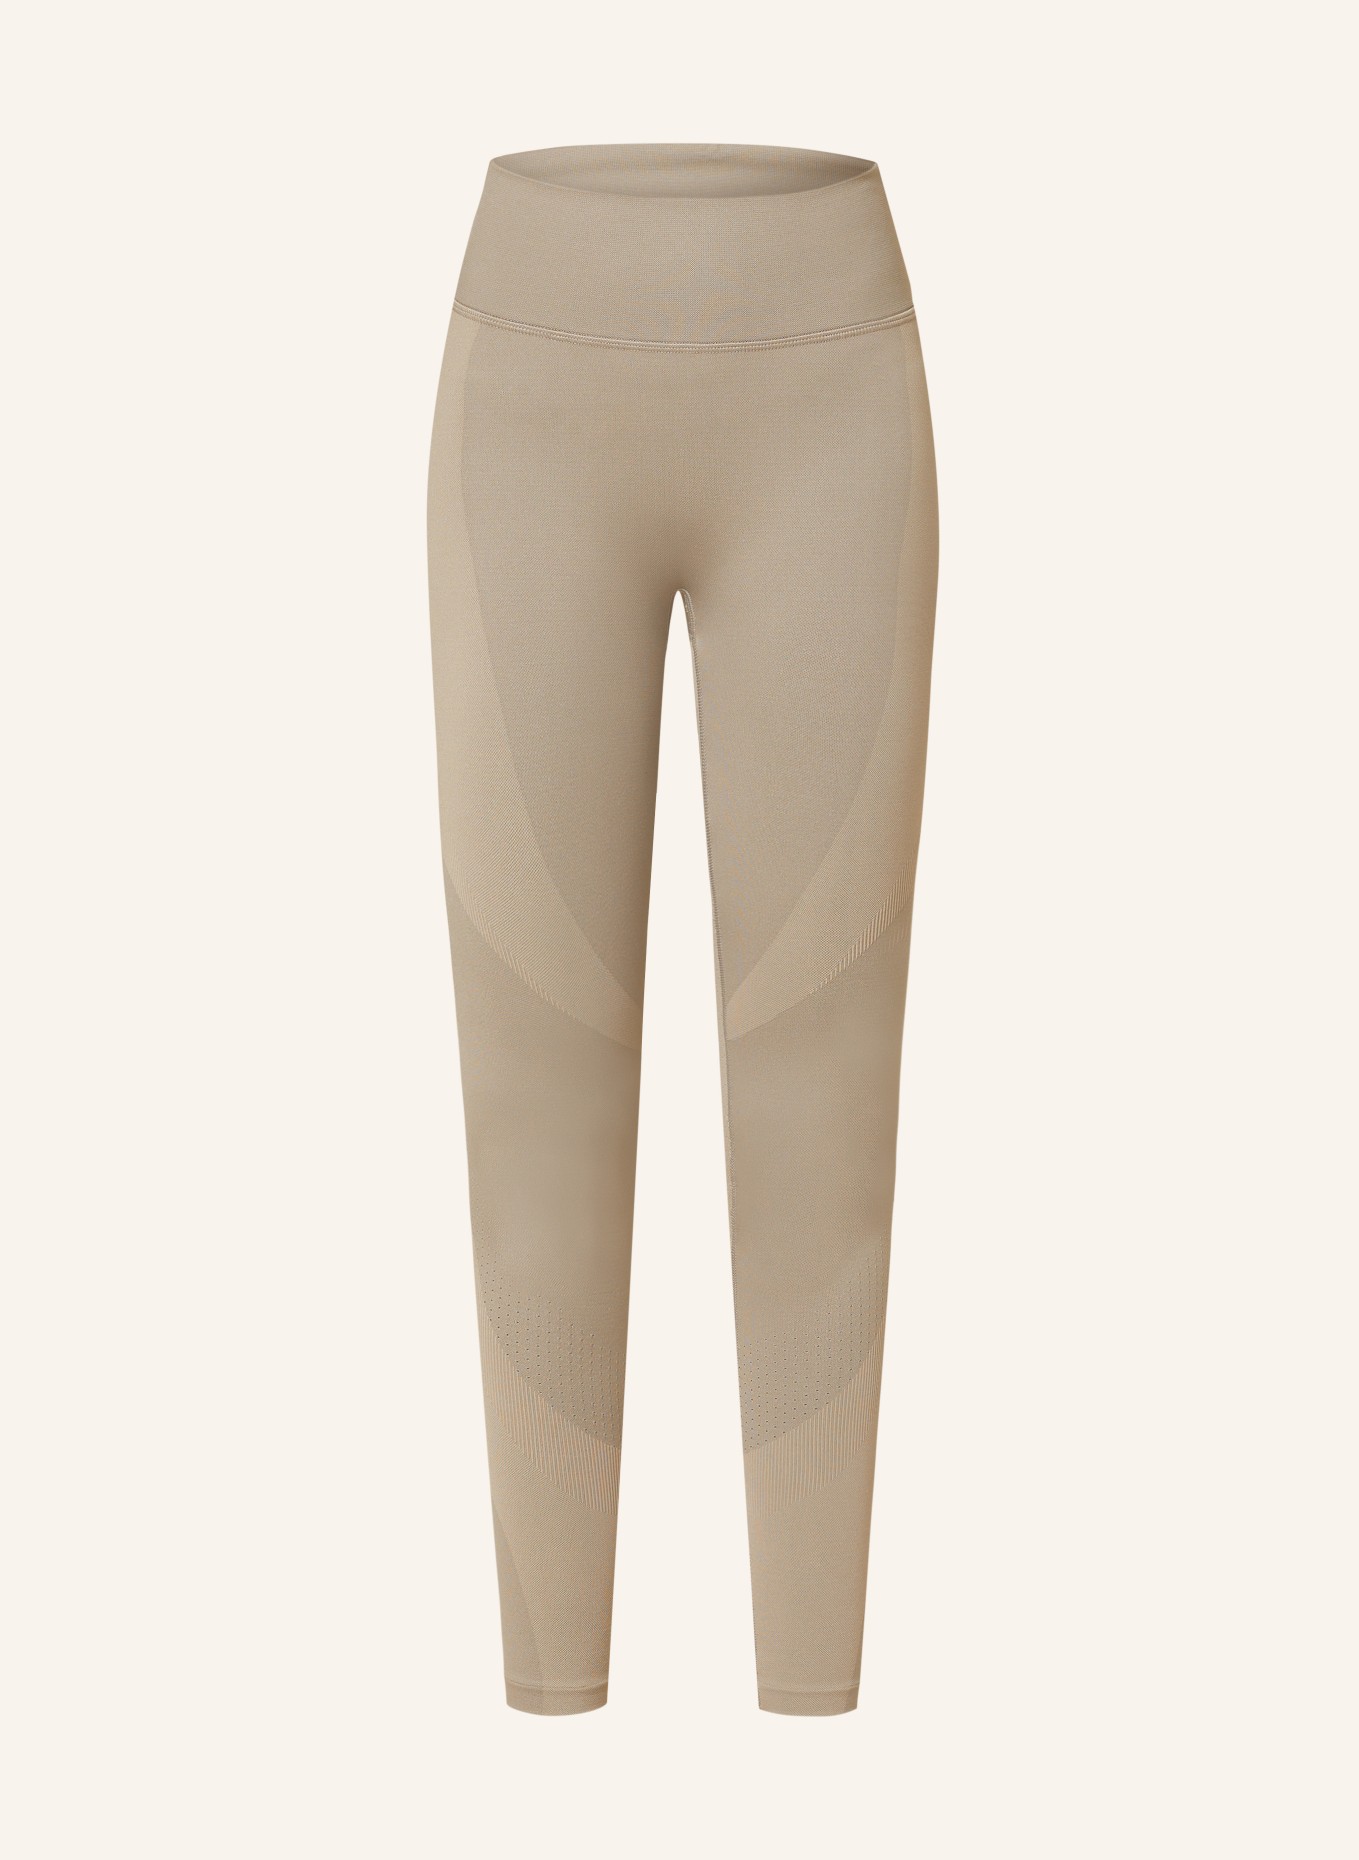 UNDER ARMOUR Tights RUSH, Farbe: TAUPE (Bild 1)